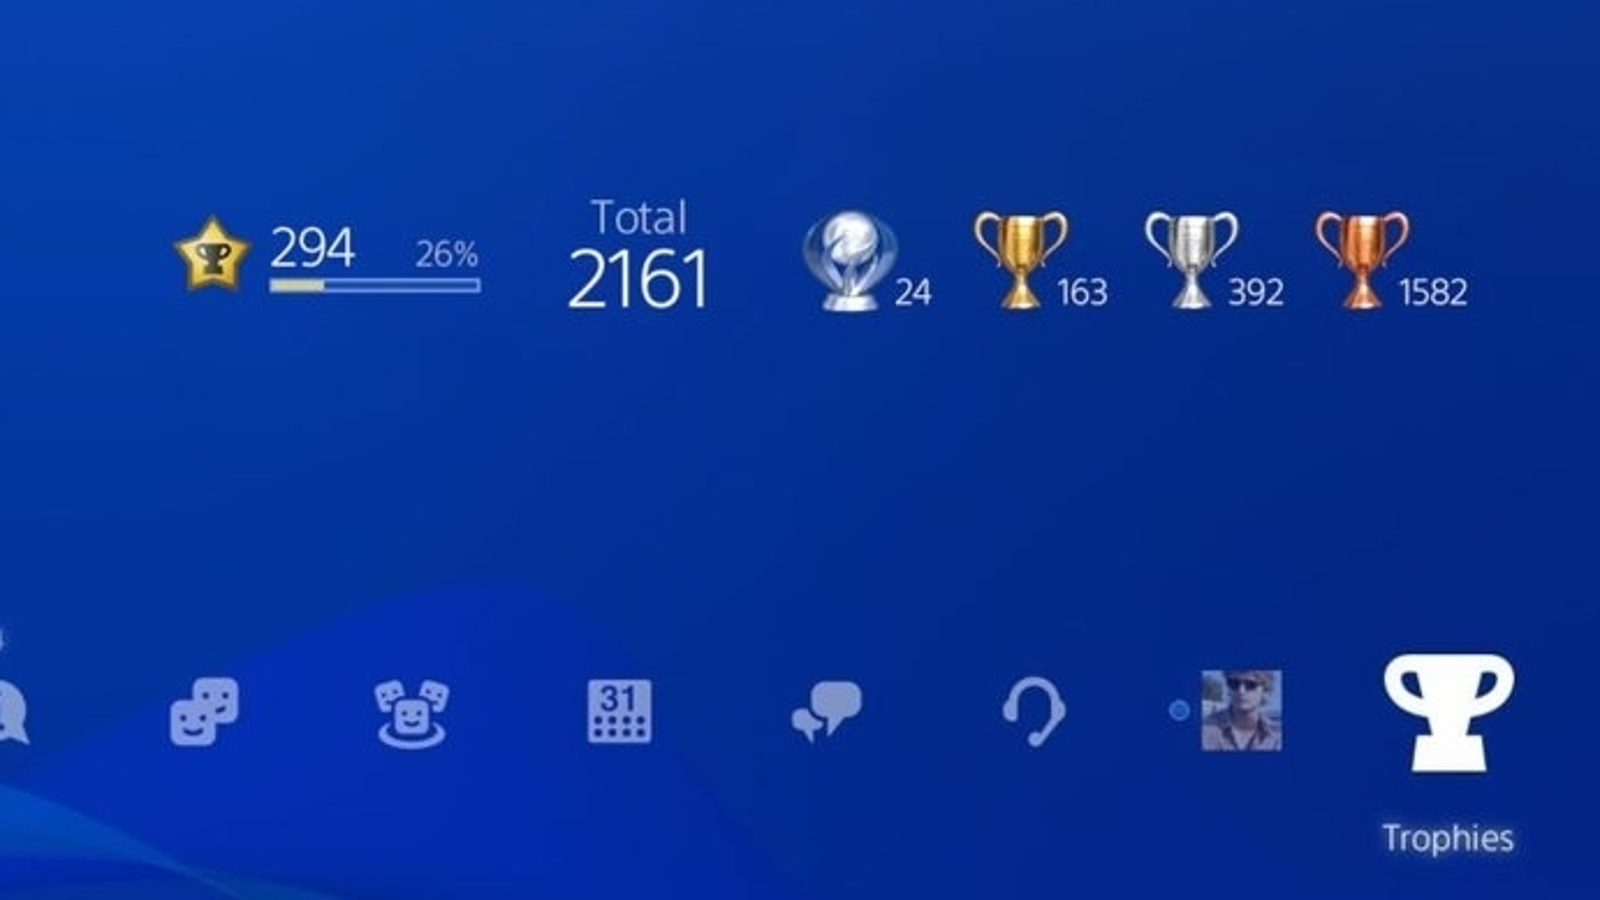 PS4 and PS5 Trophy Guide: How to Get All Trophies